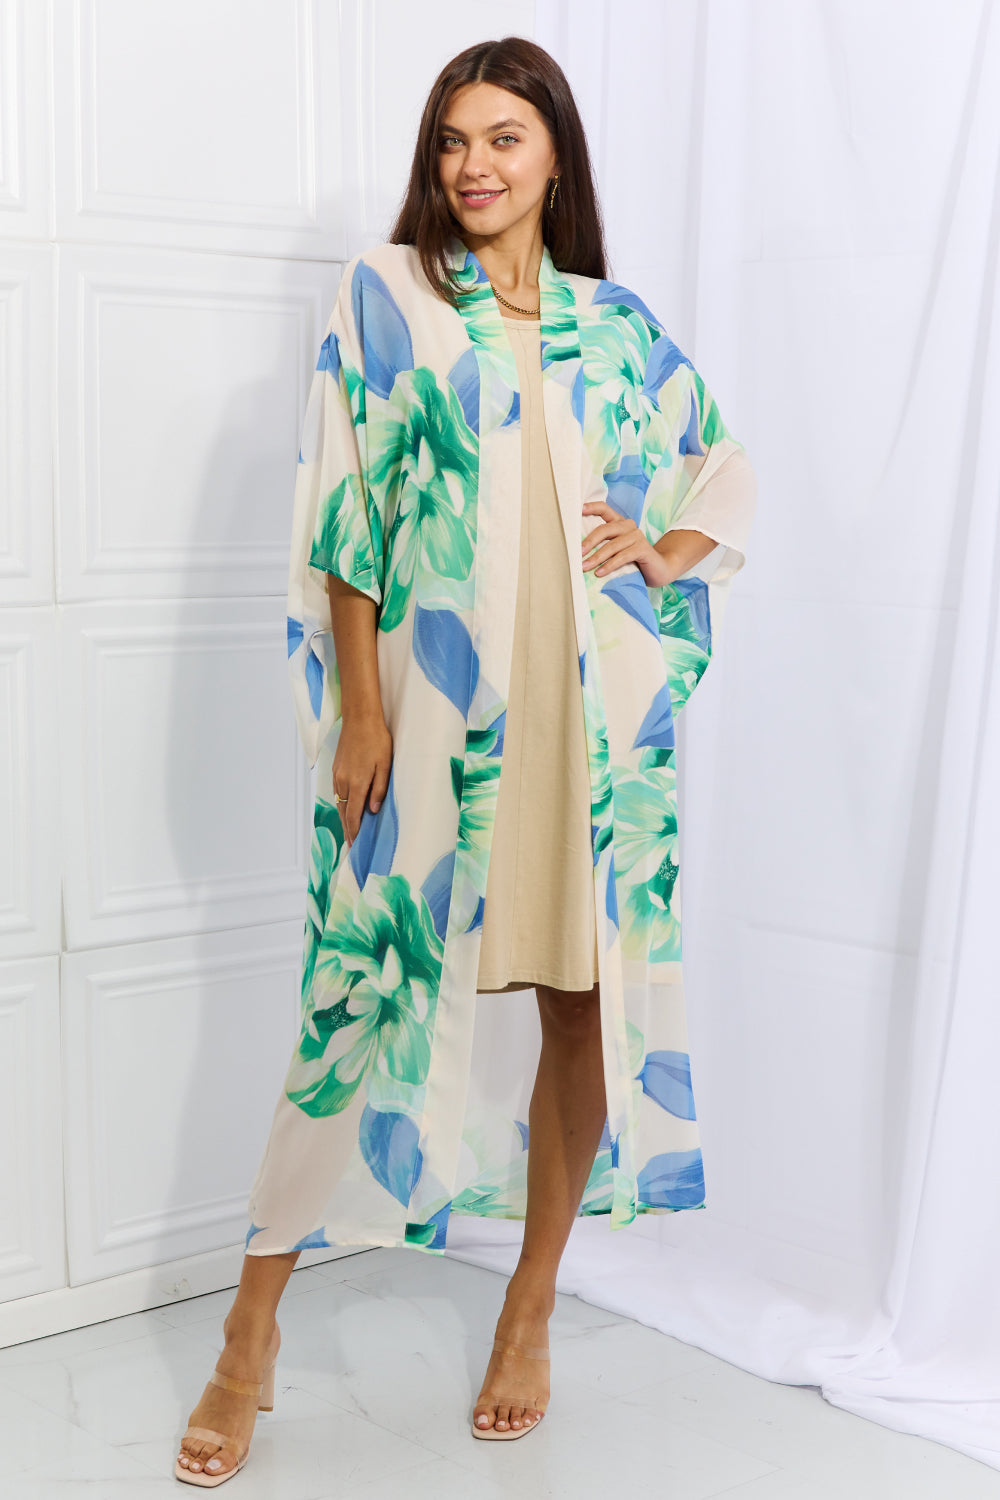 Colorful Minds Floral Kimono - Cheeky Chic Boutique